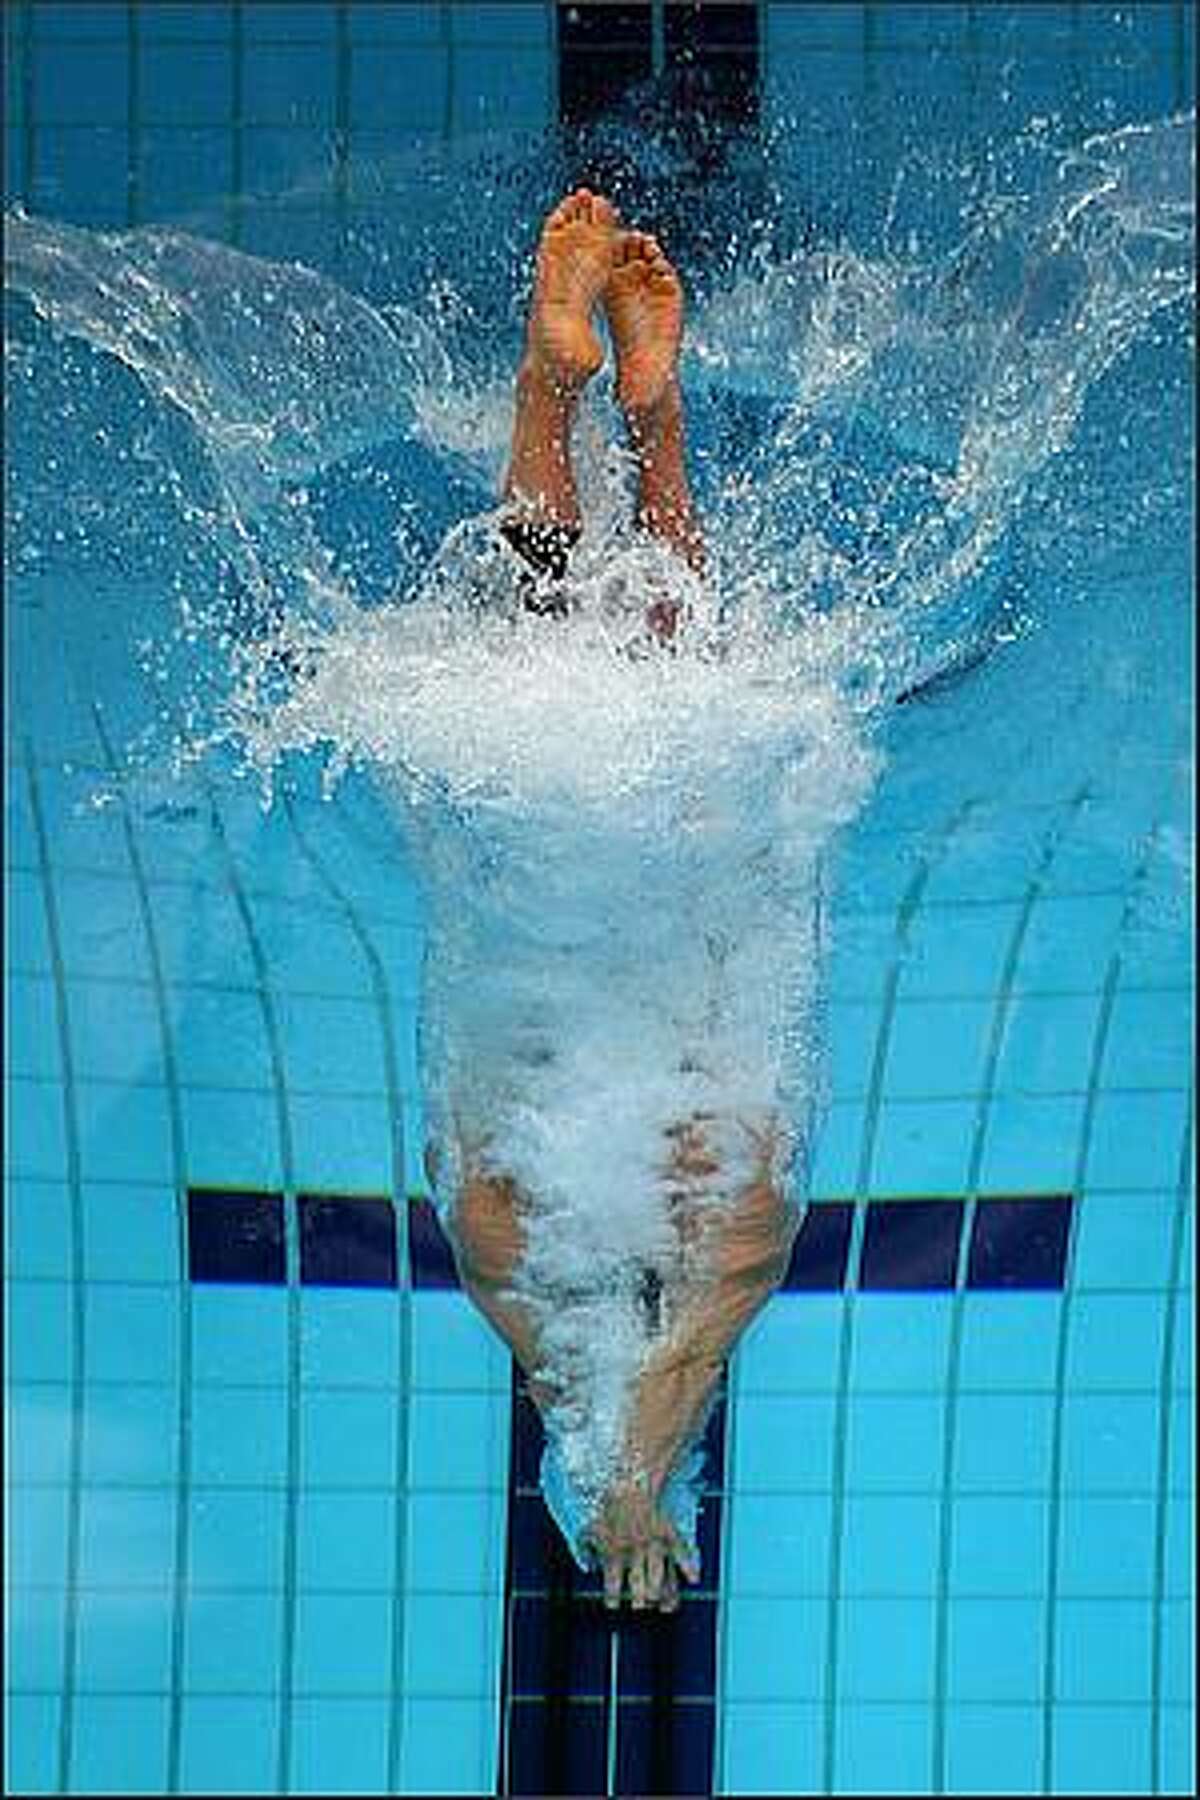 Scott Spann of the United States competes in the Men's 200m Breaststroke Final held at the National Aquatics Centre during Day 6 of the Beijing 2008 Olympic Games in Beijing, China. (Photo by Mike Hewitt/Getty Images)